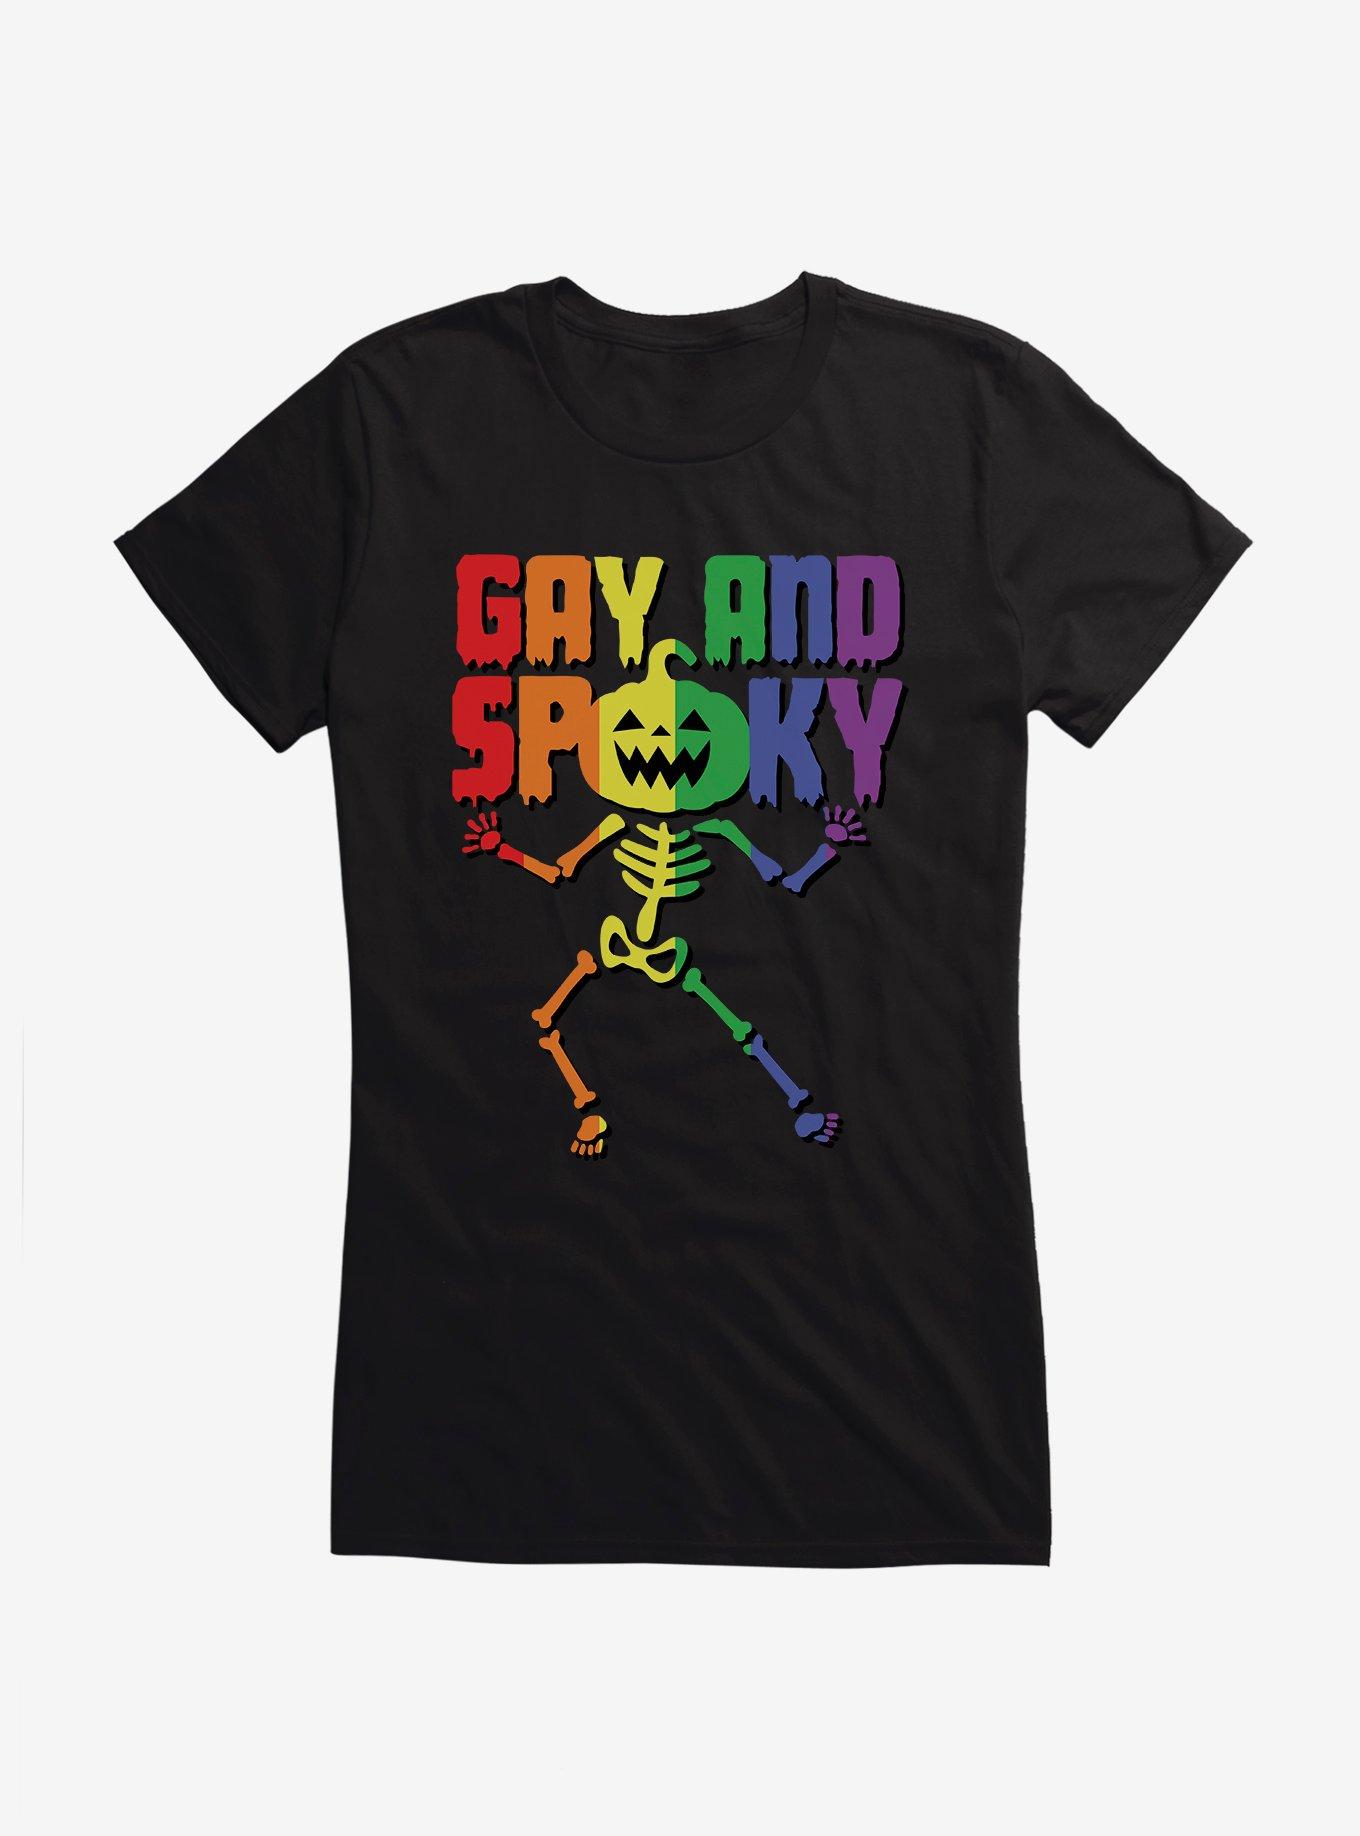 Hot Topic Rainbow Gay And Spooky Skeleton Girls T-Shirt